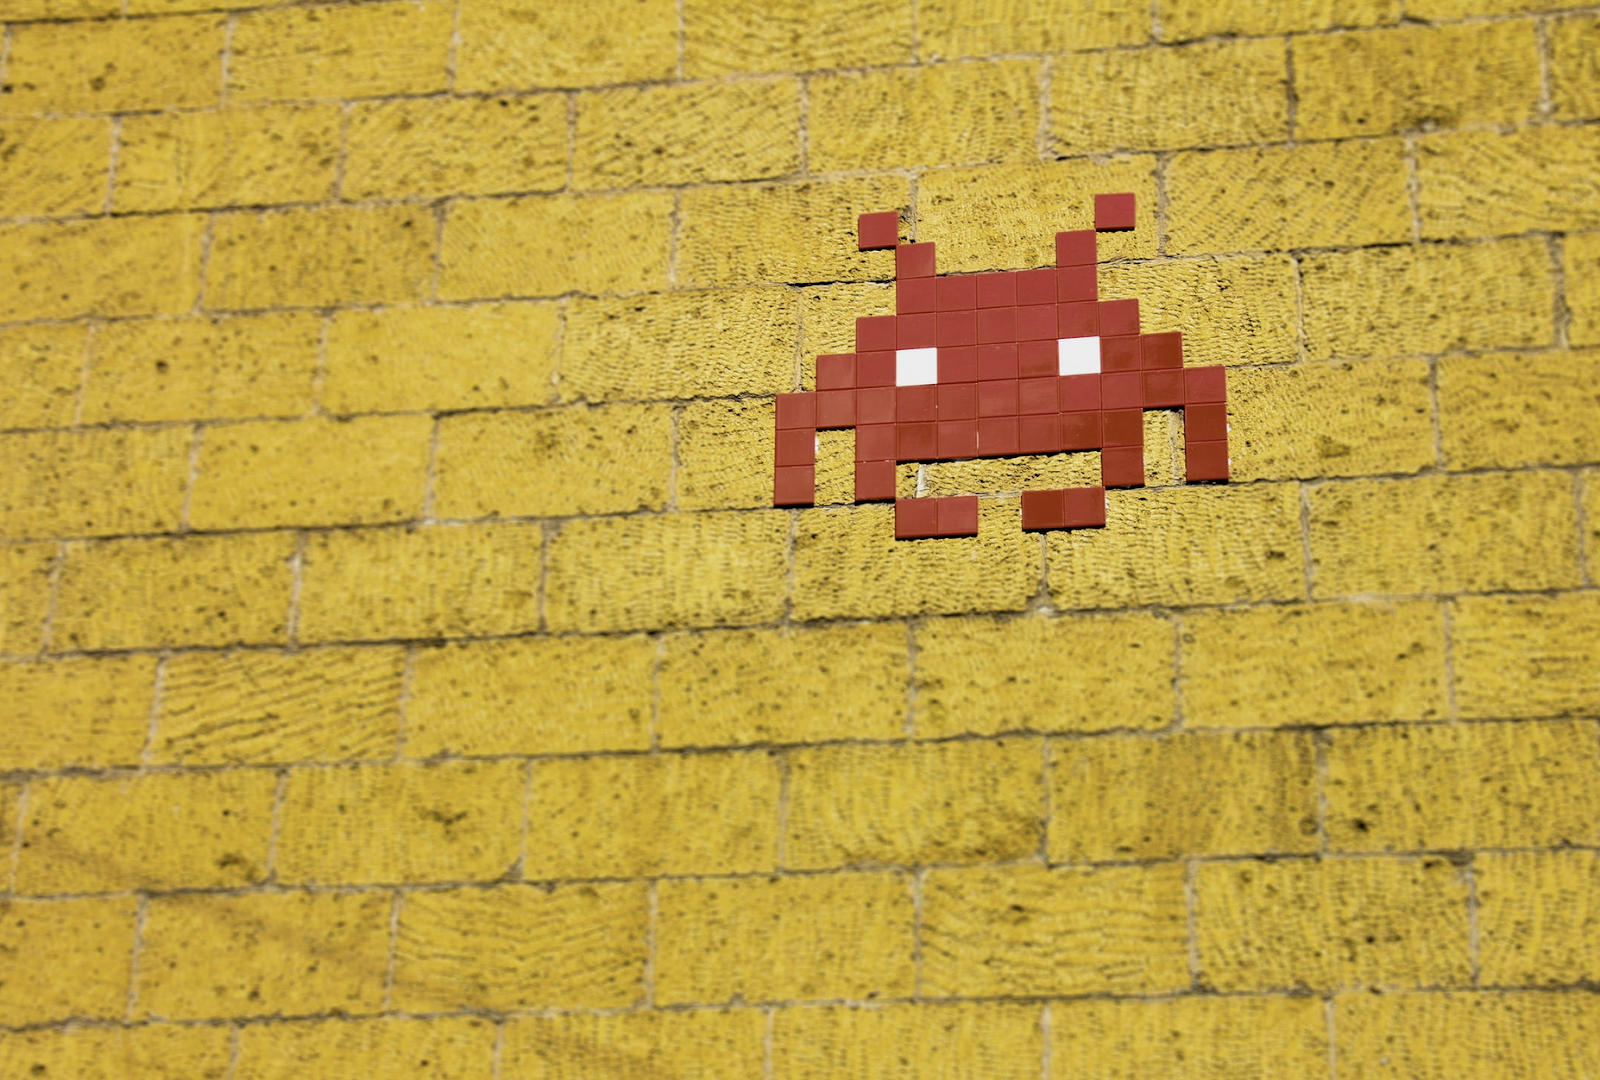 A red pixel alien on a yellow brick background.